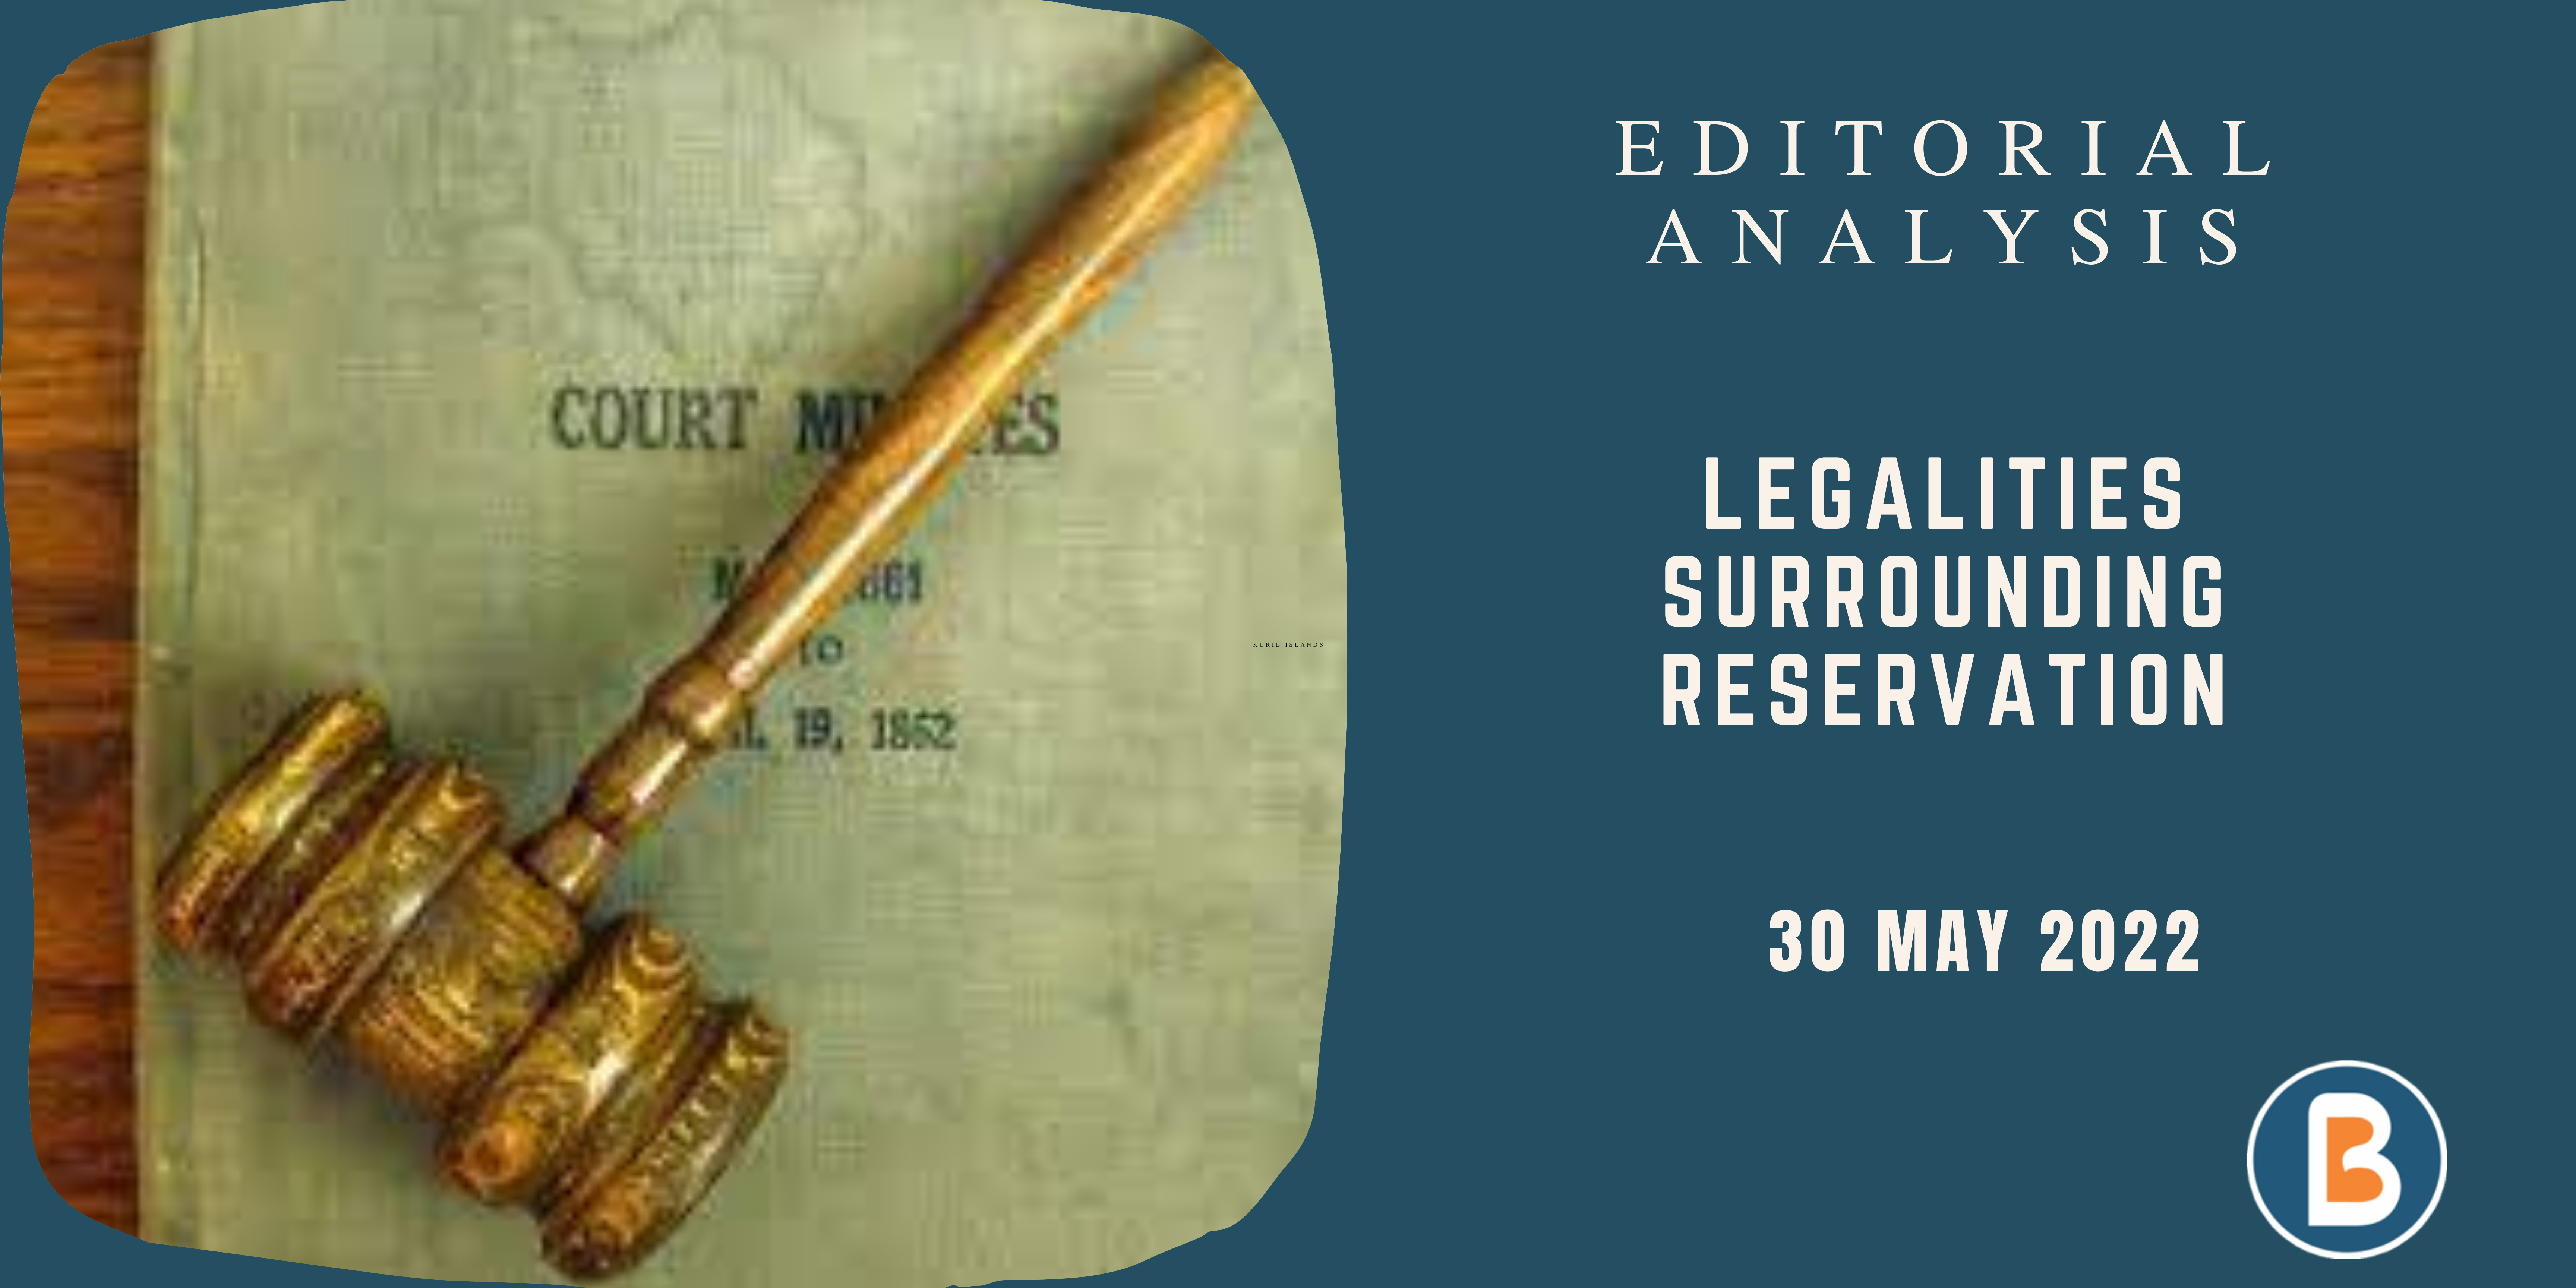 Editorial Analysis for IAS - Legalities Surrounding Reservation